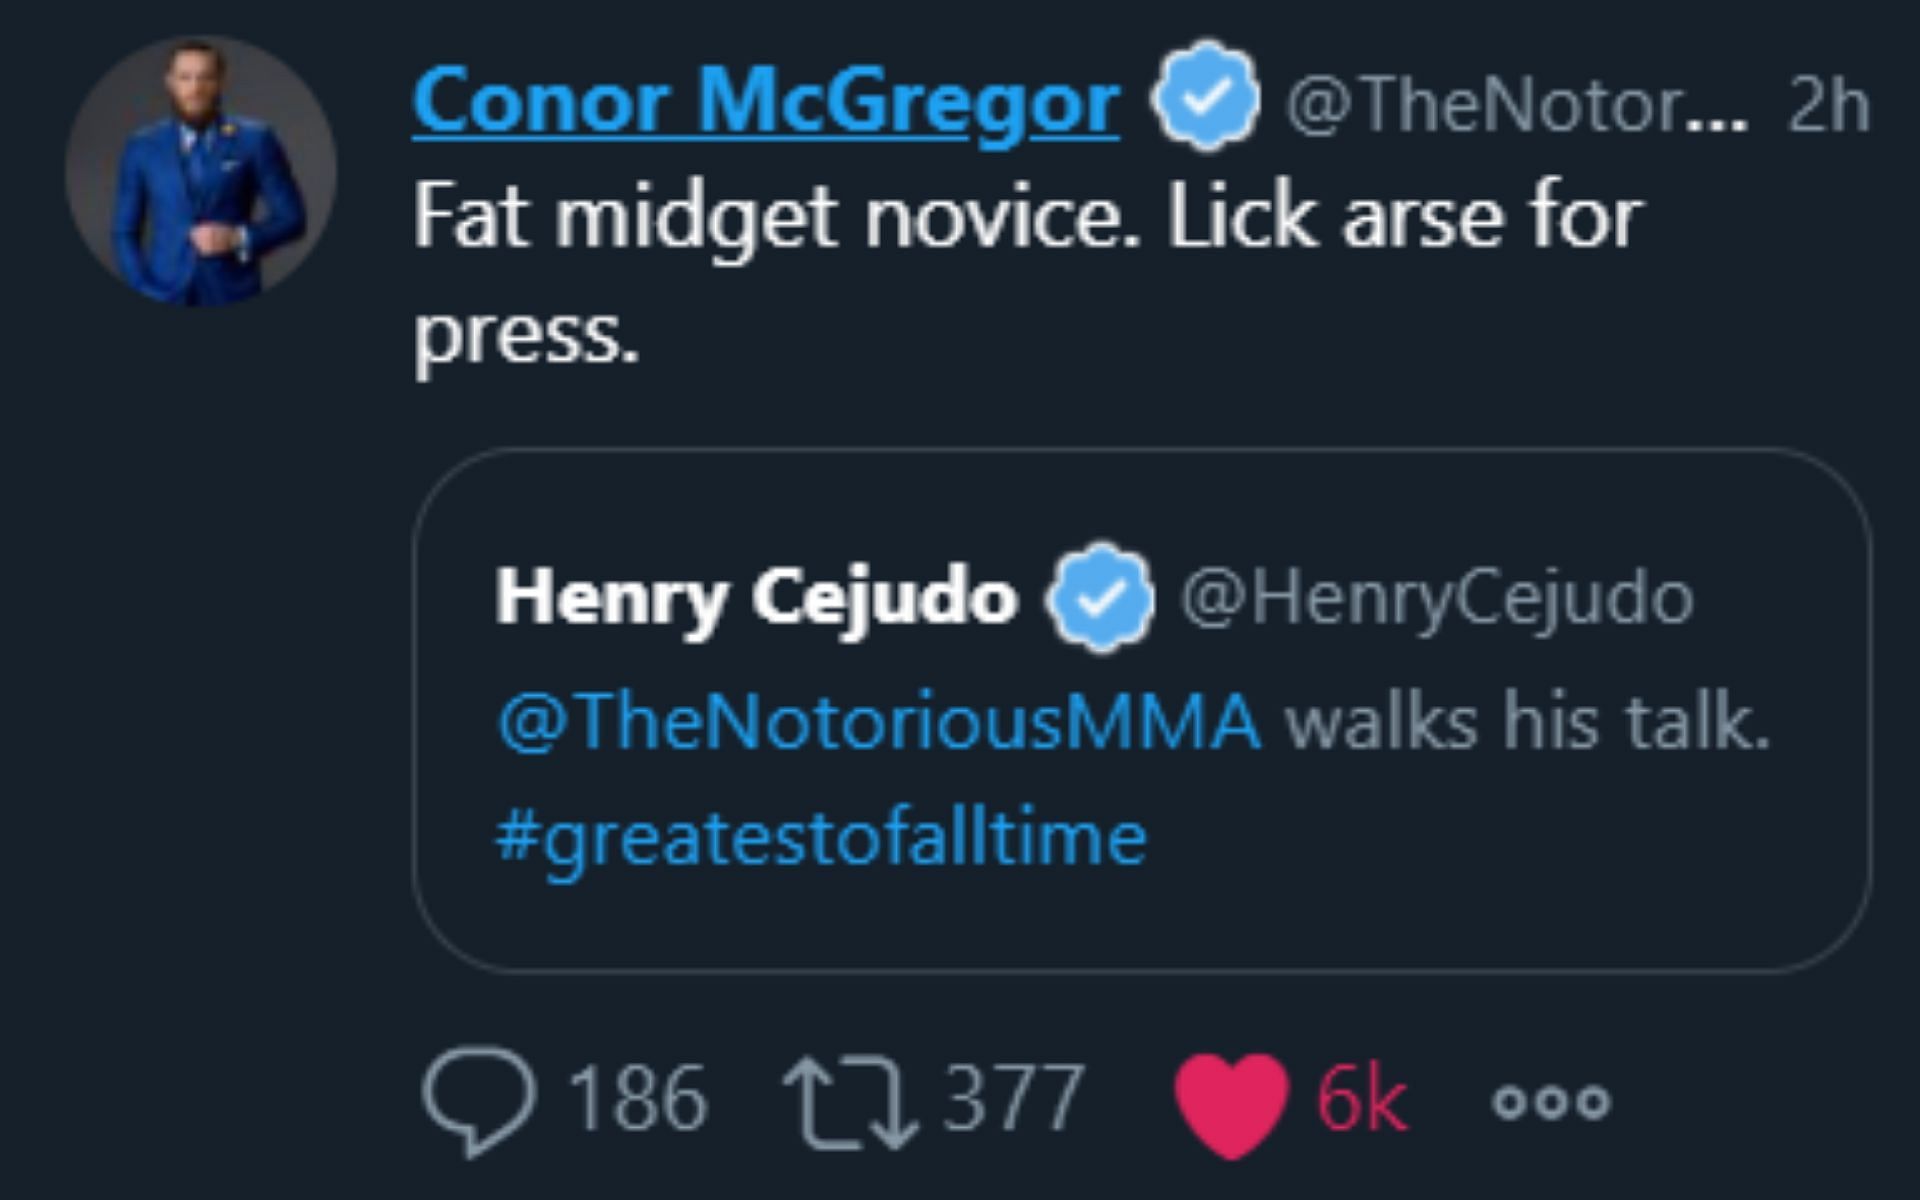 Conor McGregor replying to Henry Cejudo&#039;s tweet from 2016